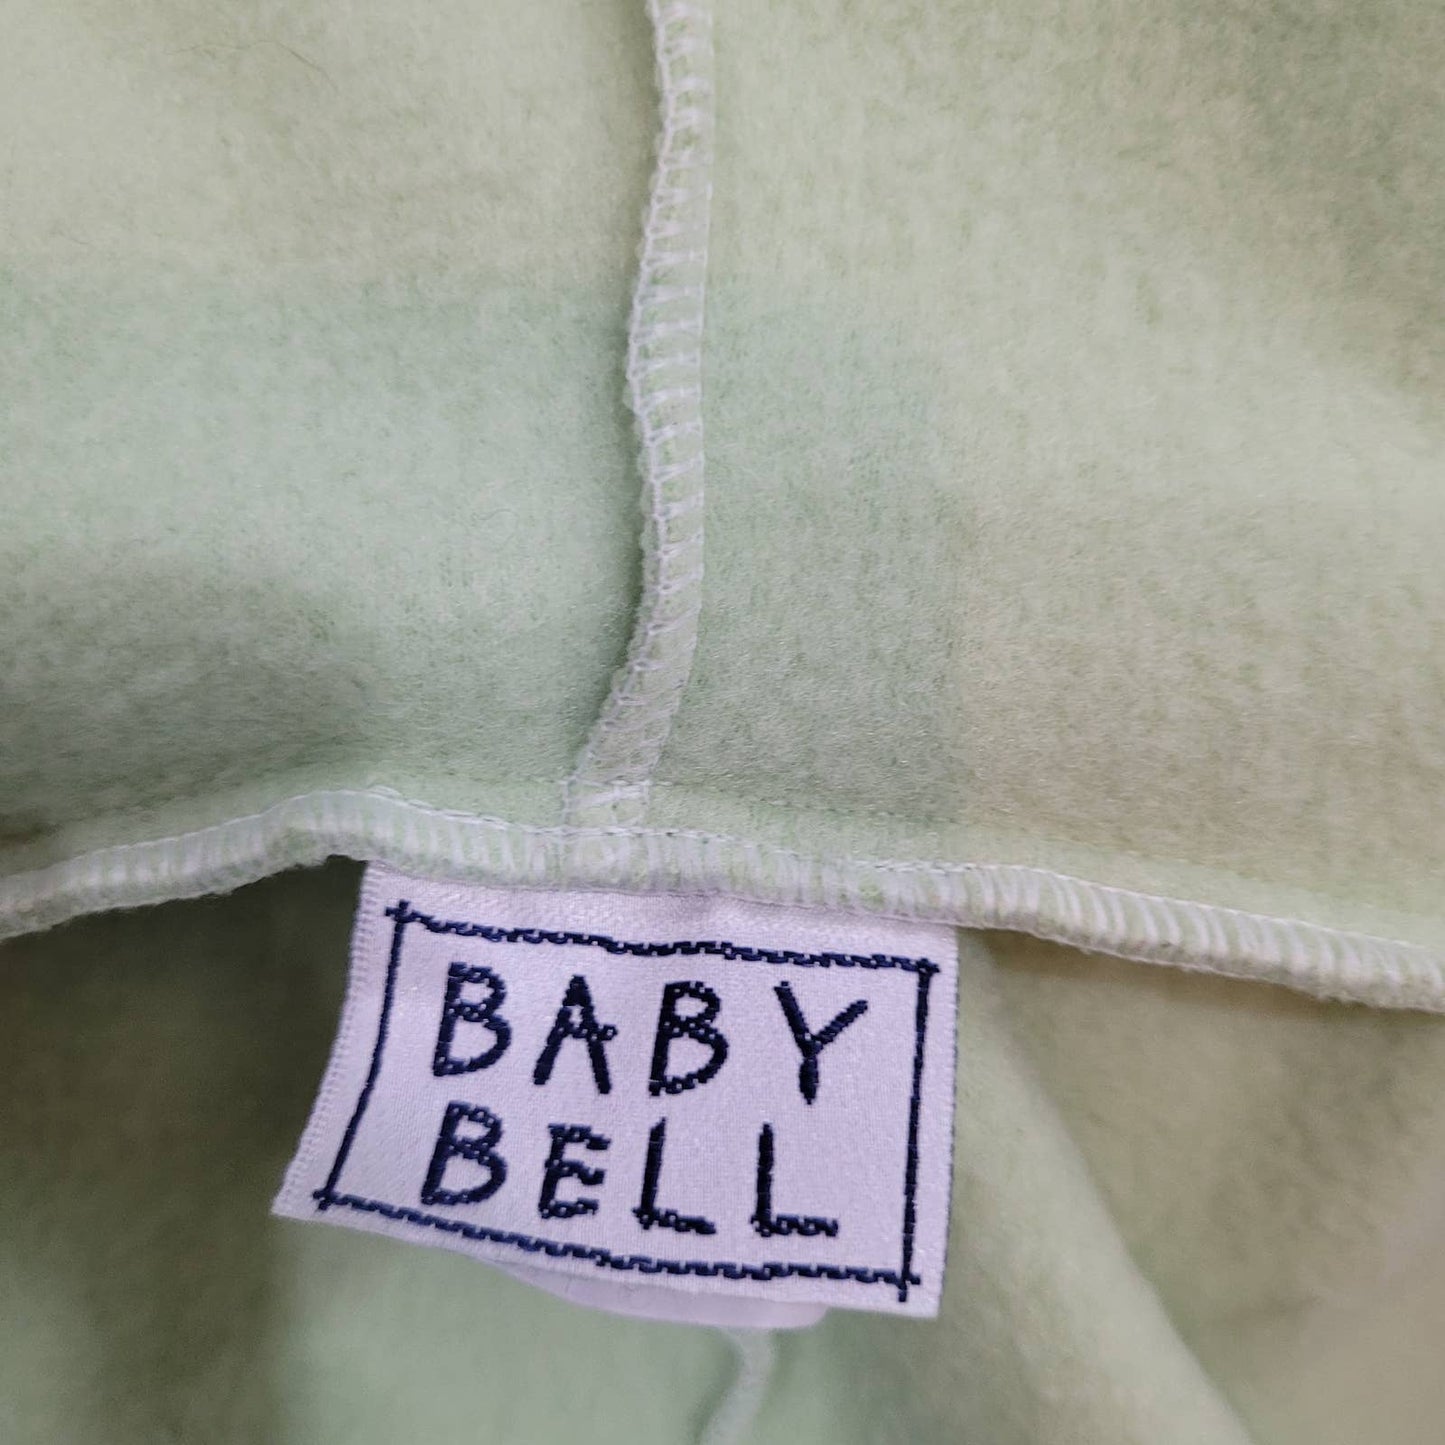 Baby Bell Green Fleece Jumpsuit with Puppy Design - Size 18M